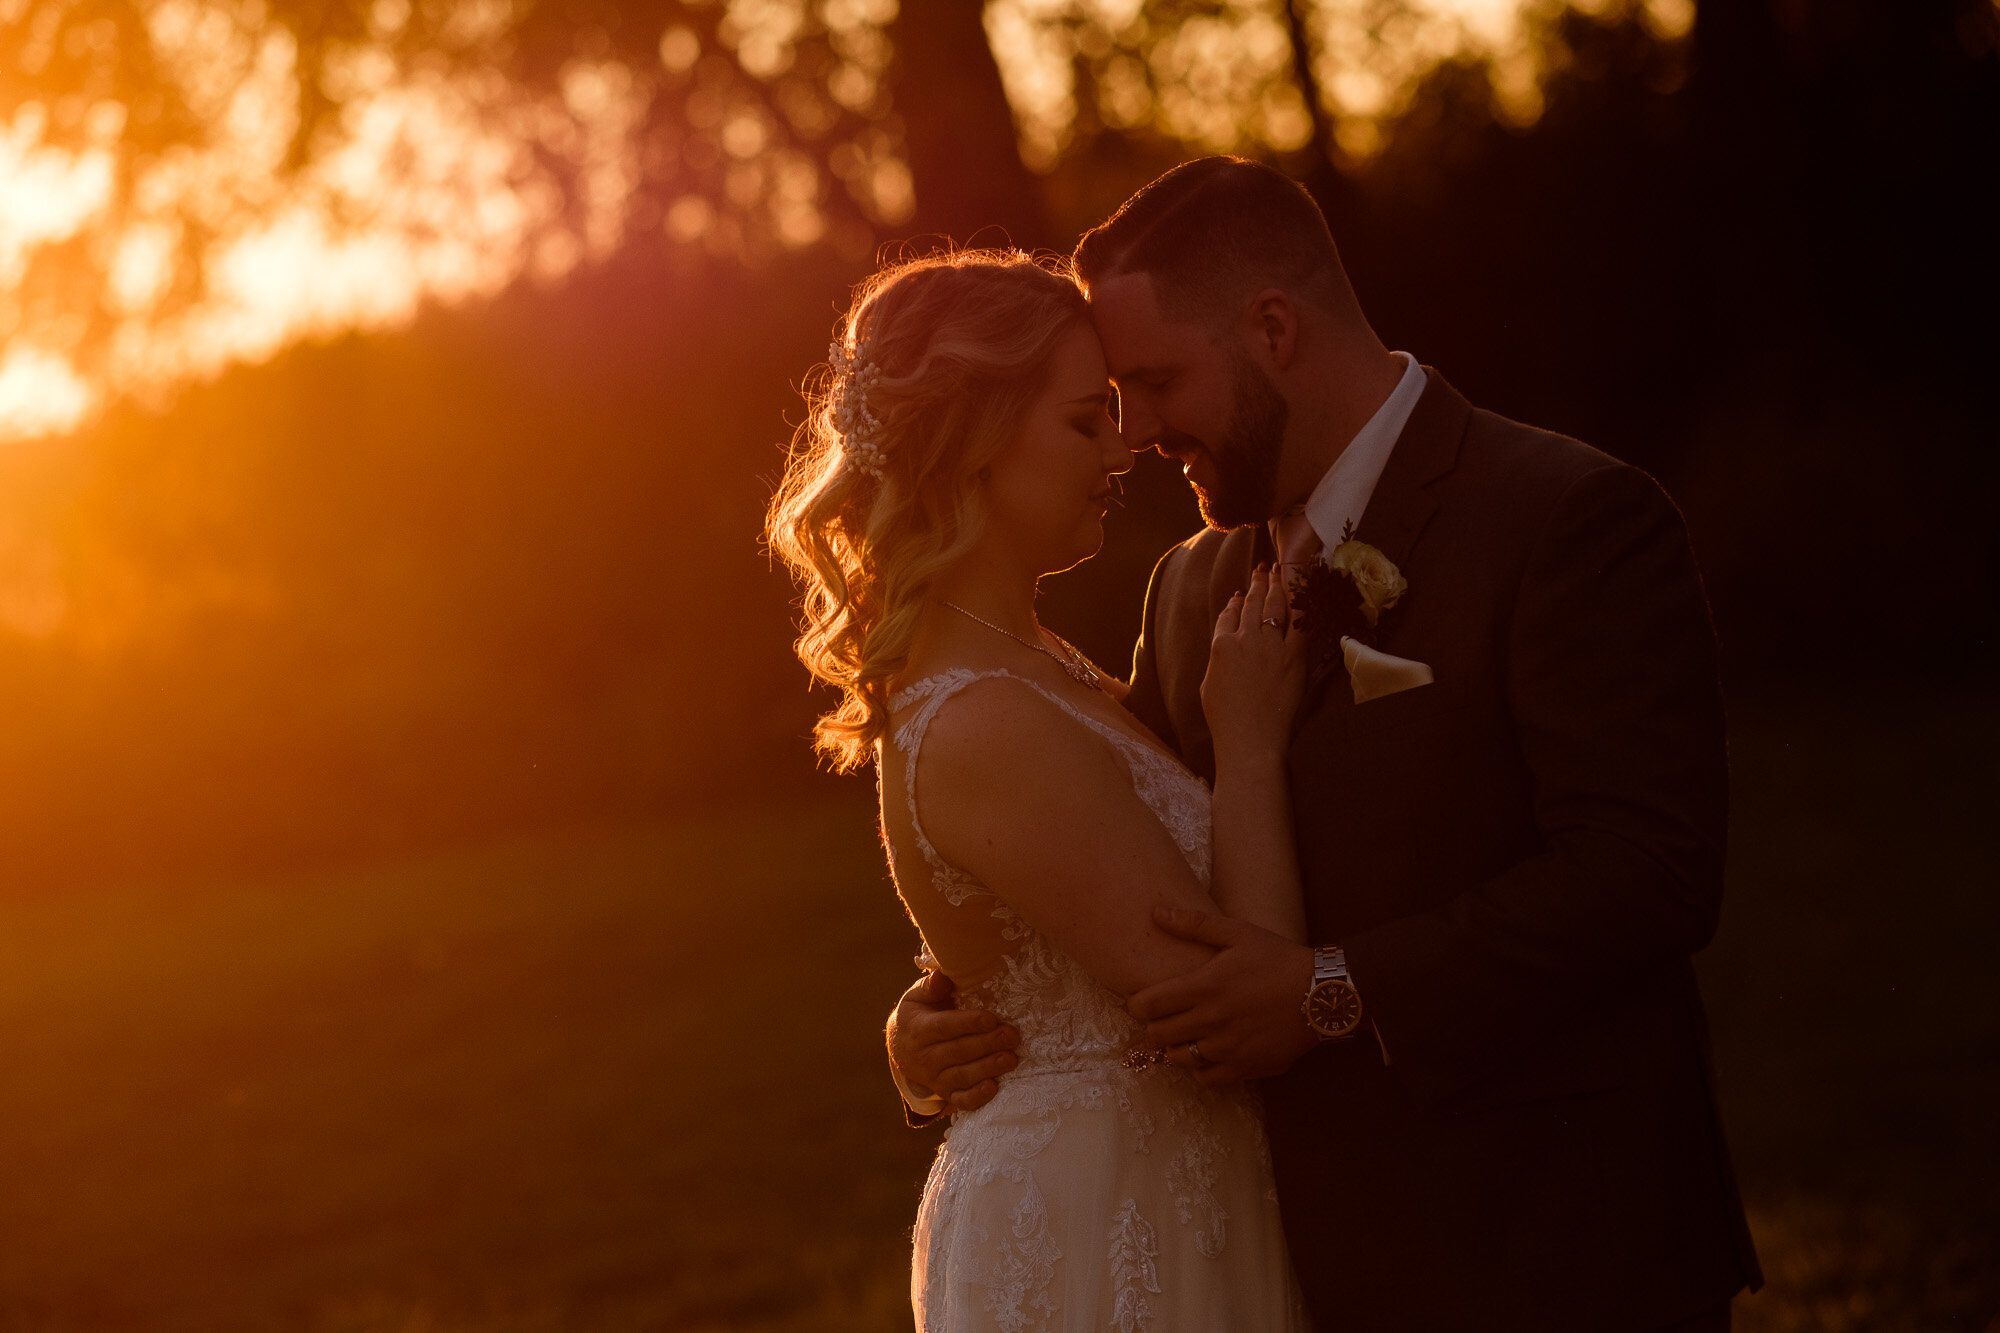  The bride and groom pose for some golden hour sunset wedding portraits at the Three Bridges event centre located outside of Waterloo, Ontario. Photograph by Toronto wedding photographer Scott Williams. 